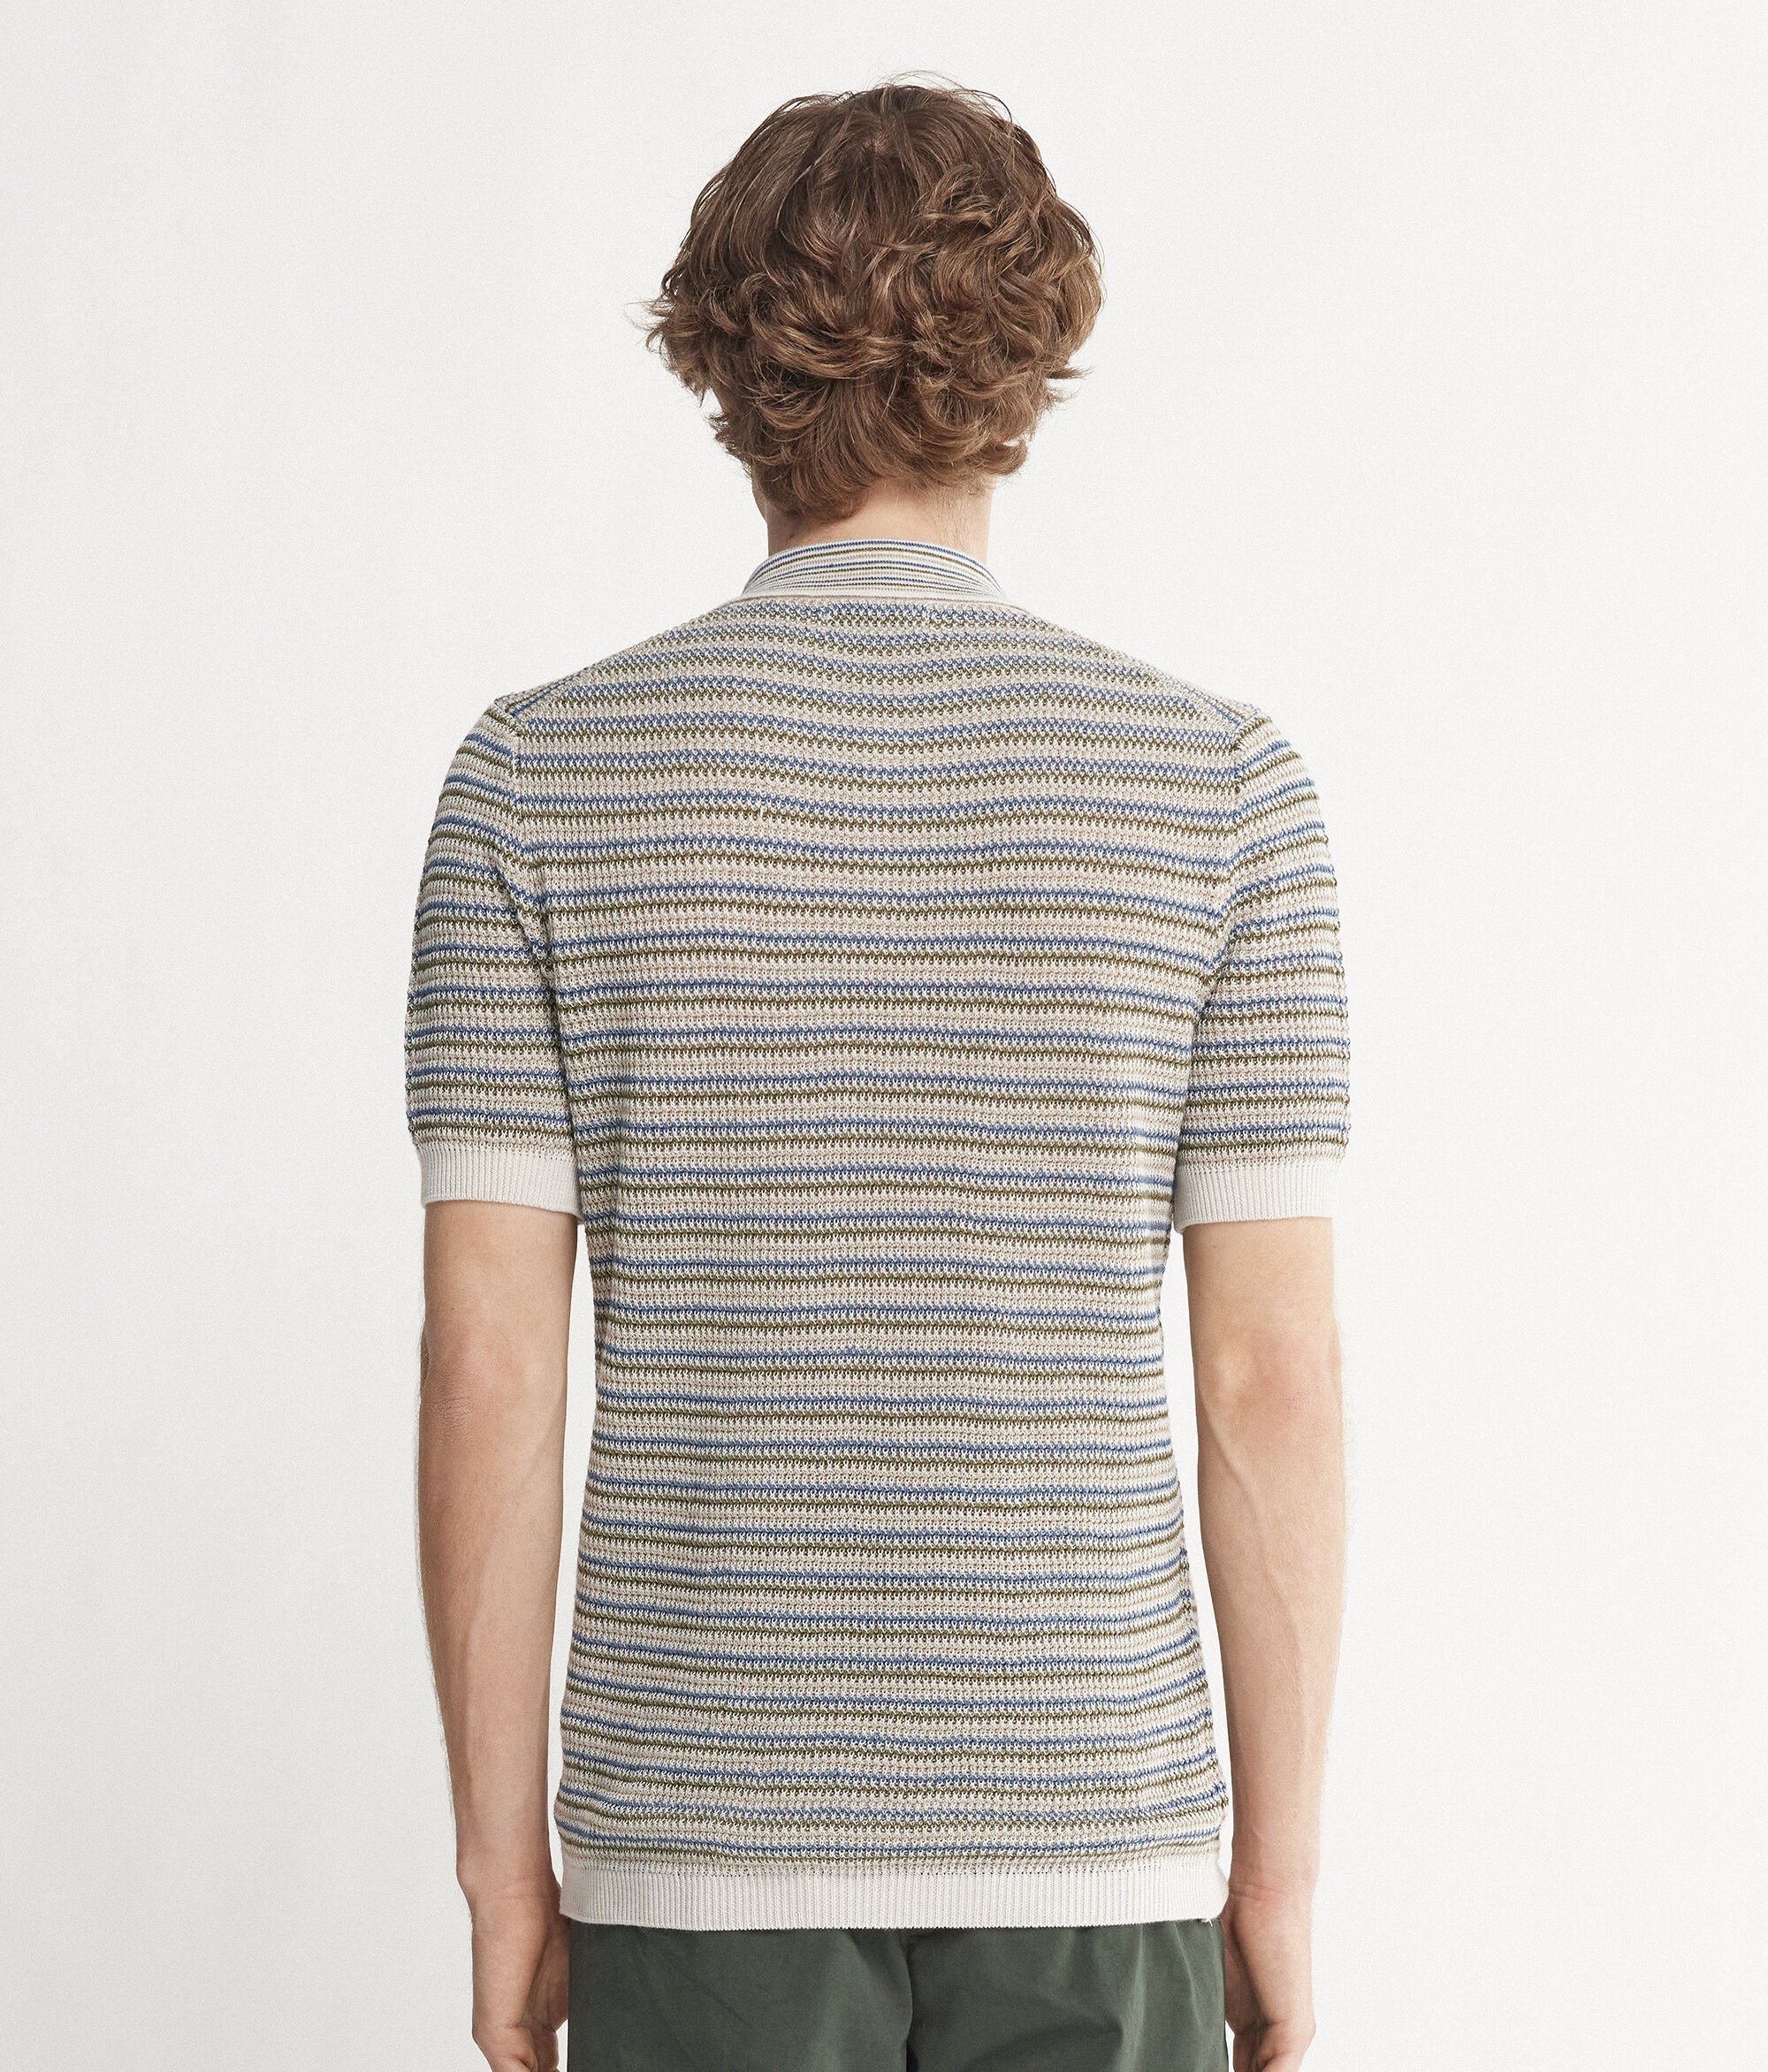 Striped Short-Sleeved Polo Shirt